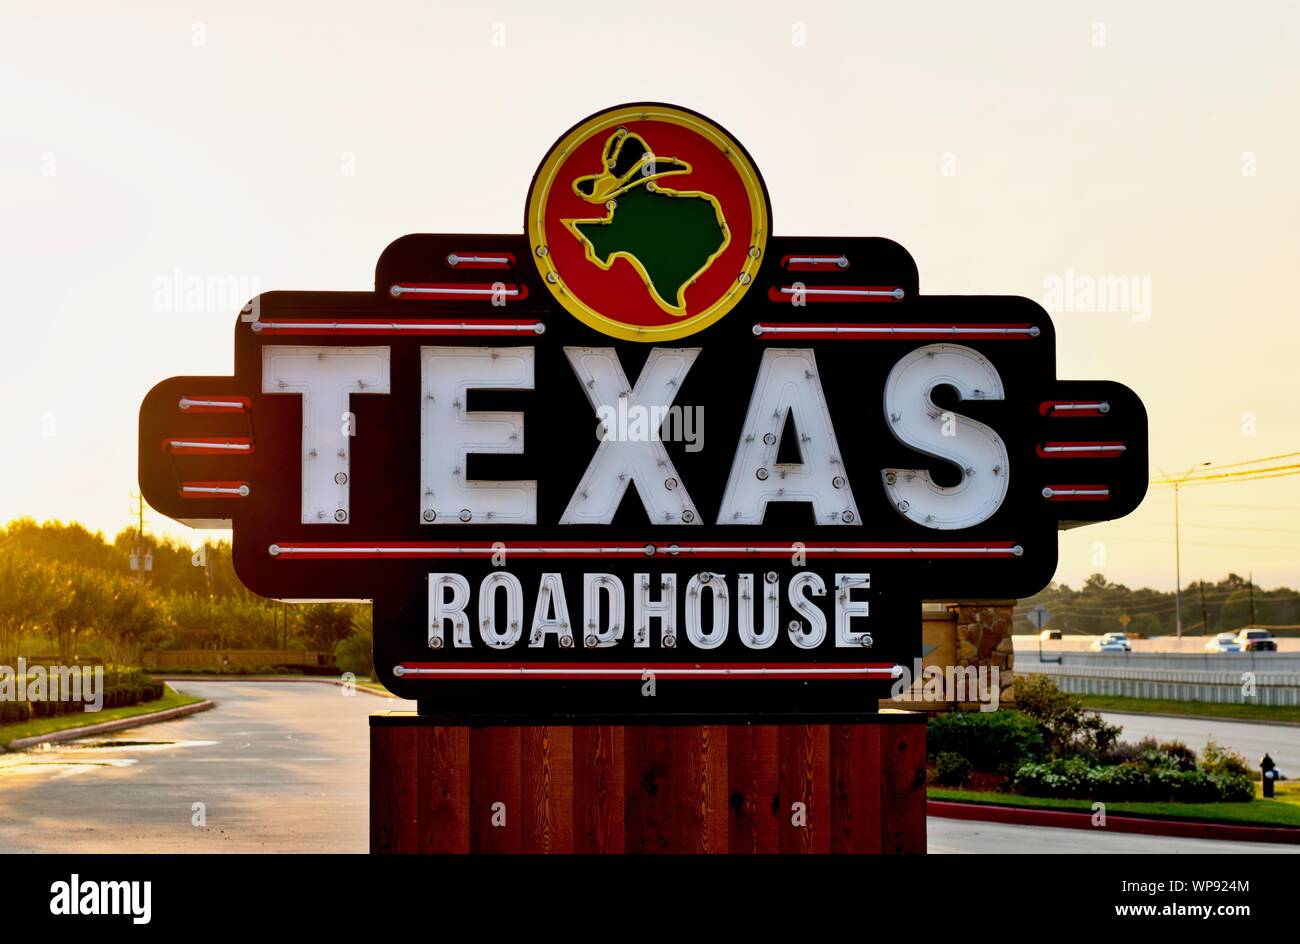 Houston, Texas/USA 09/06/2019: Texas Roadhouse restaurant sign on the side of a freeway in Humble, Texas during an early morning sunrise. Stock Photo